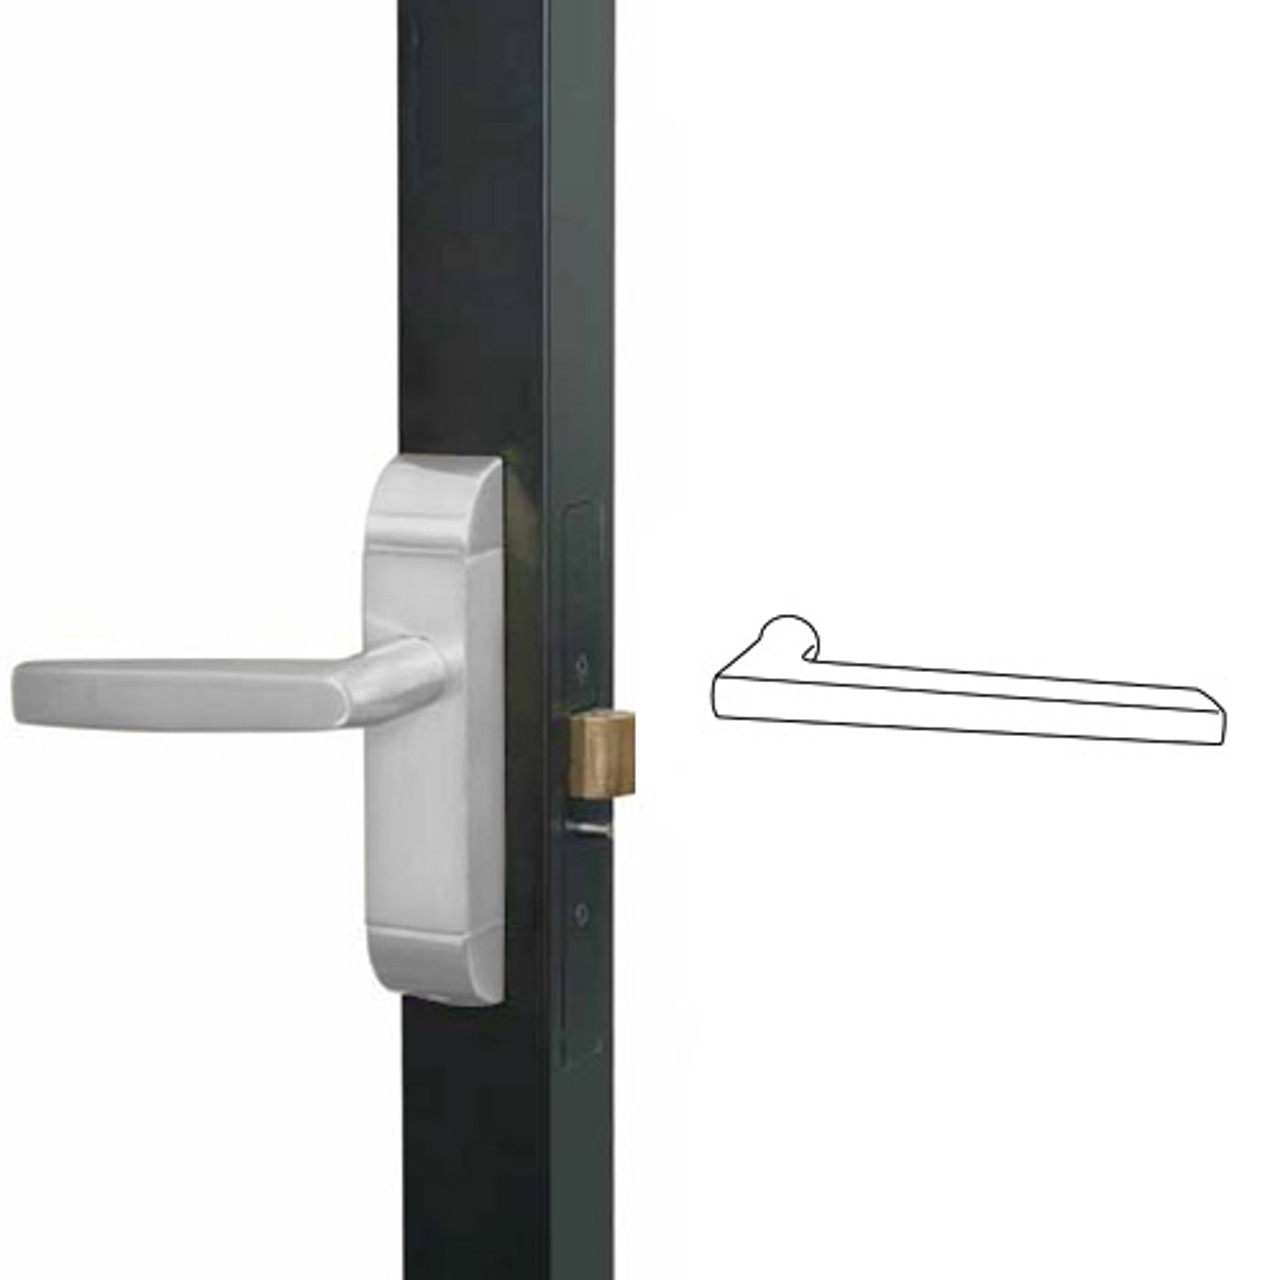 4600M-MD-521-US32 Adams Rite MD Designer Deadlatch handle in Bright Stainless Finish